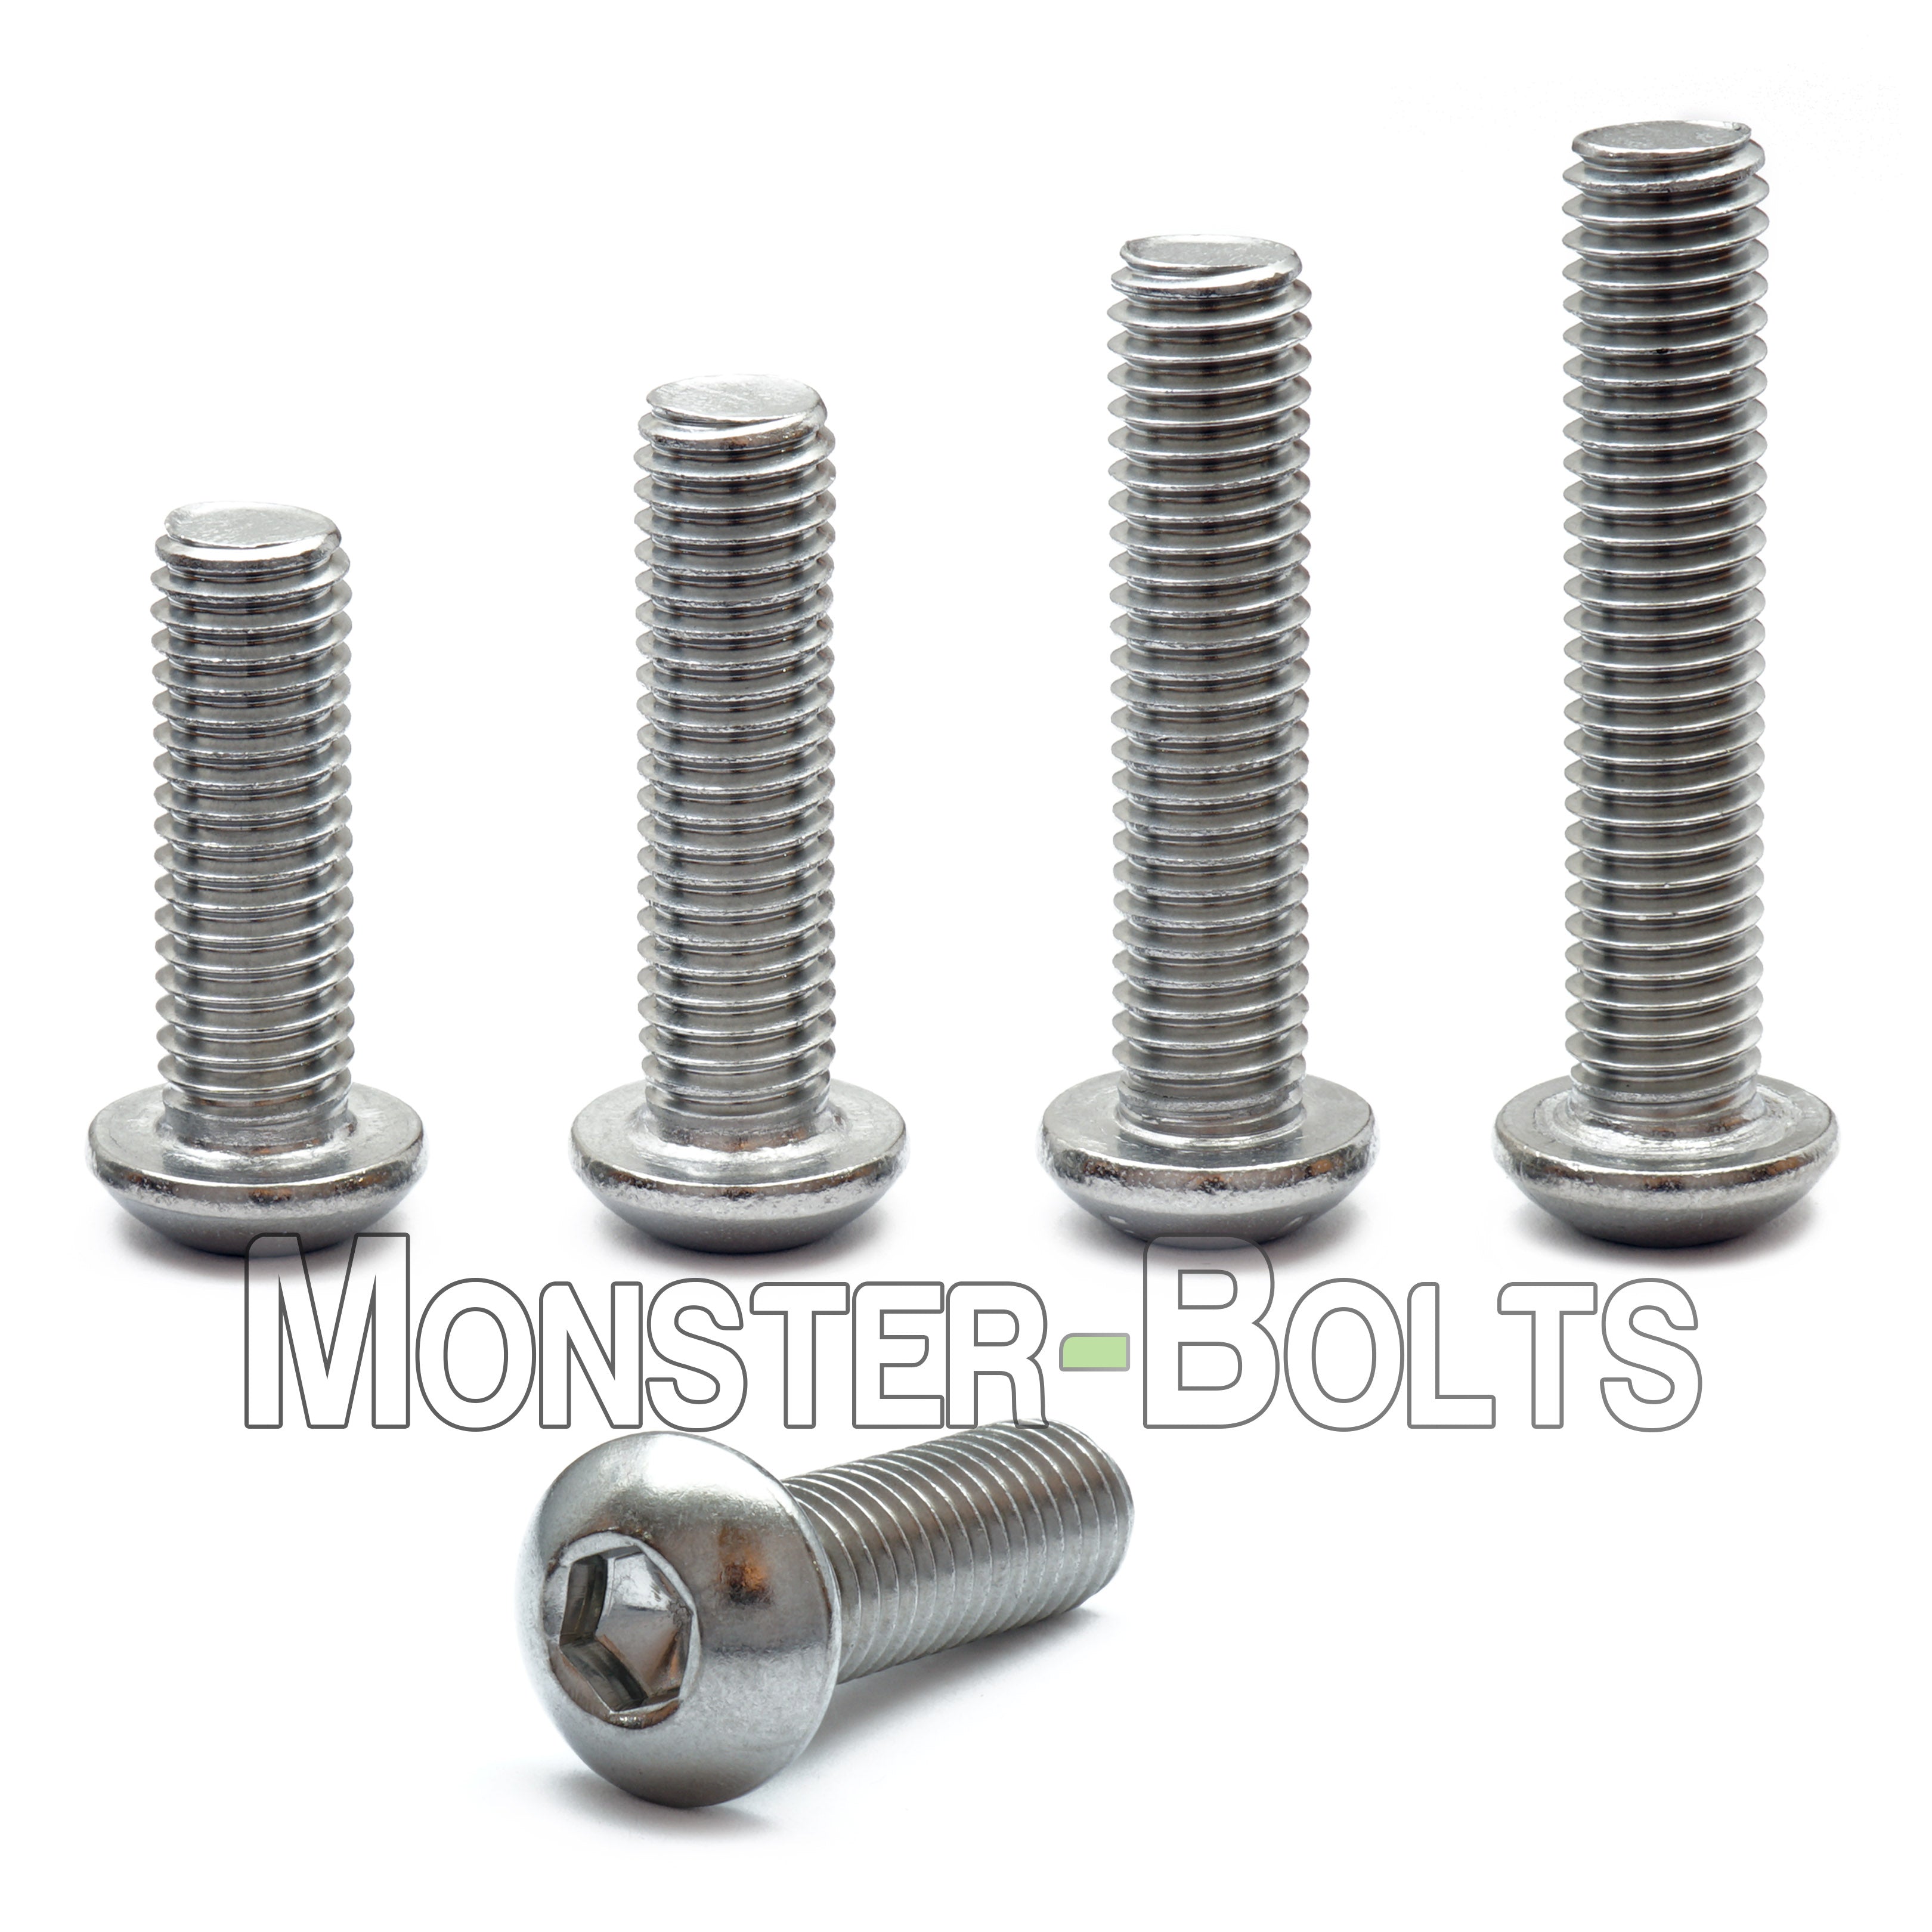 NUTS A2 STAINLESS STEEL SOCKET BUTTON DOME HEAD WASHERS M5 x 8MM x 10 SETS